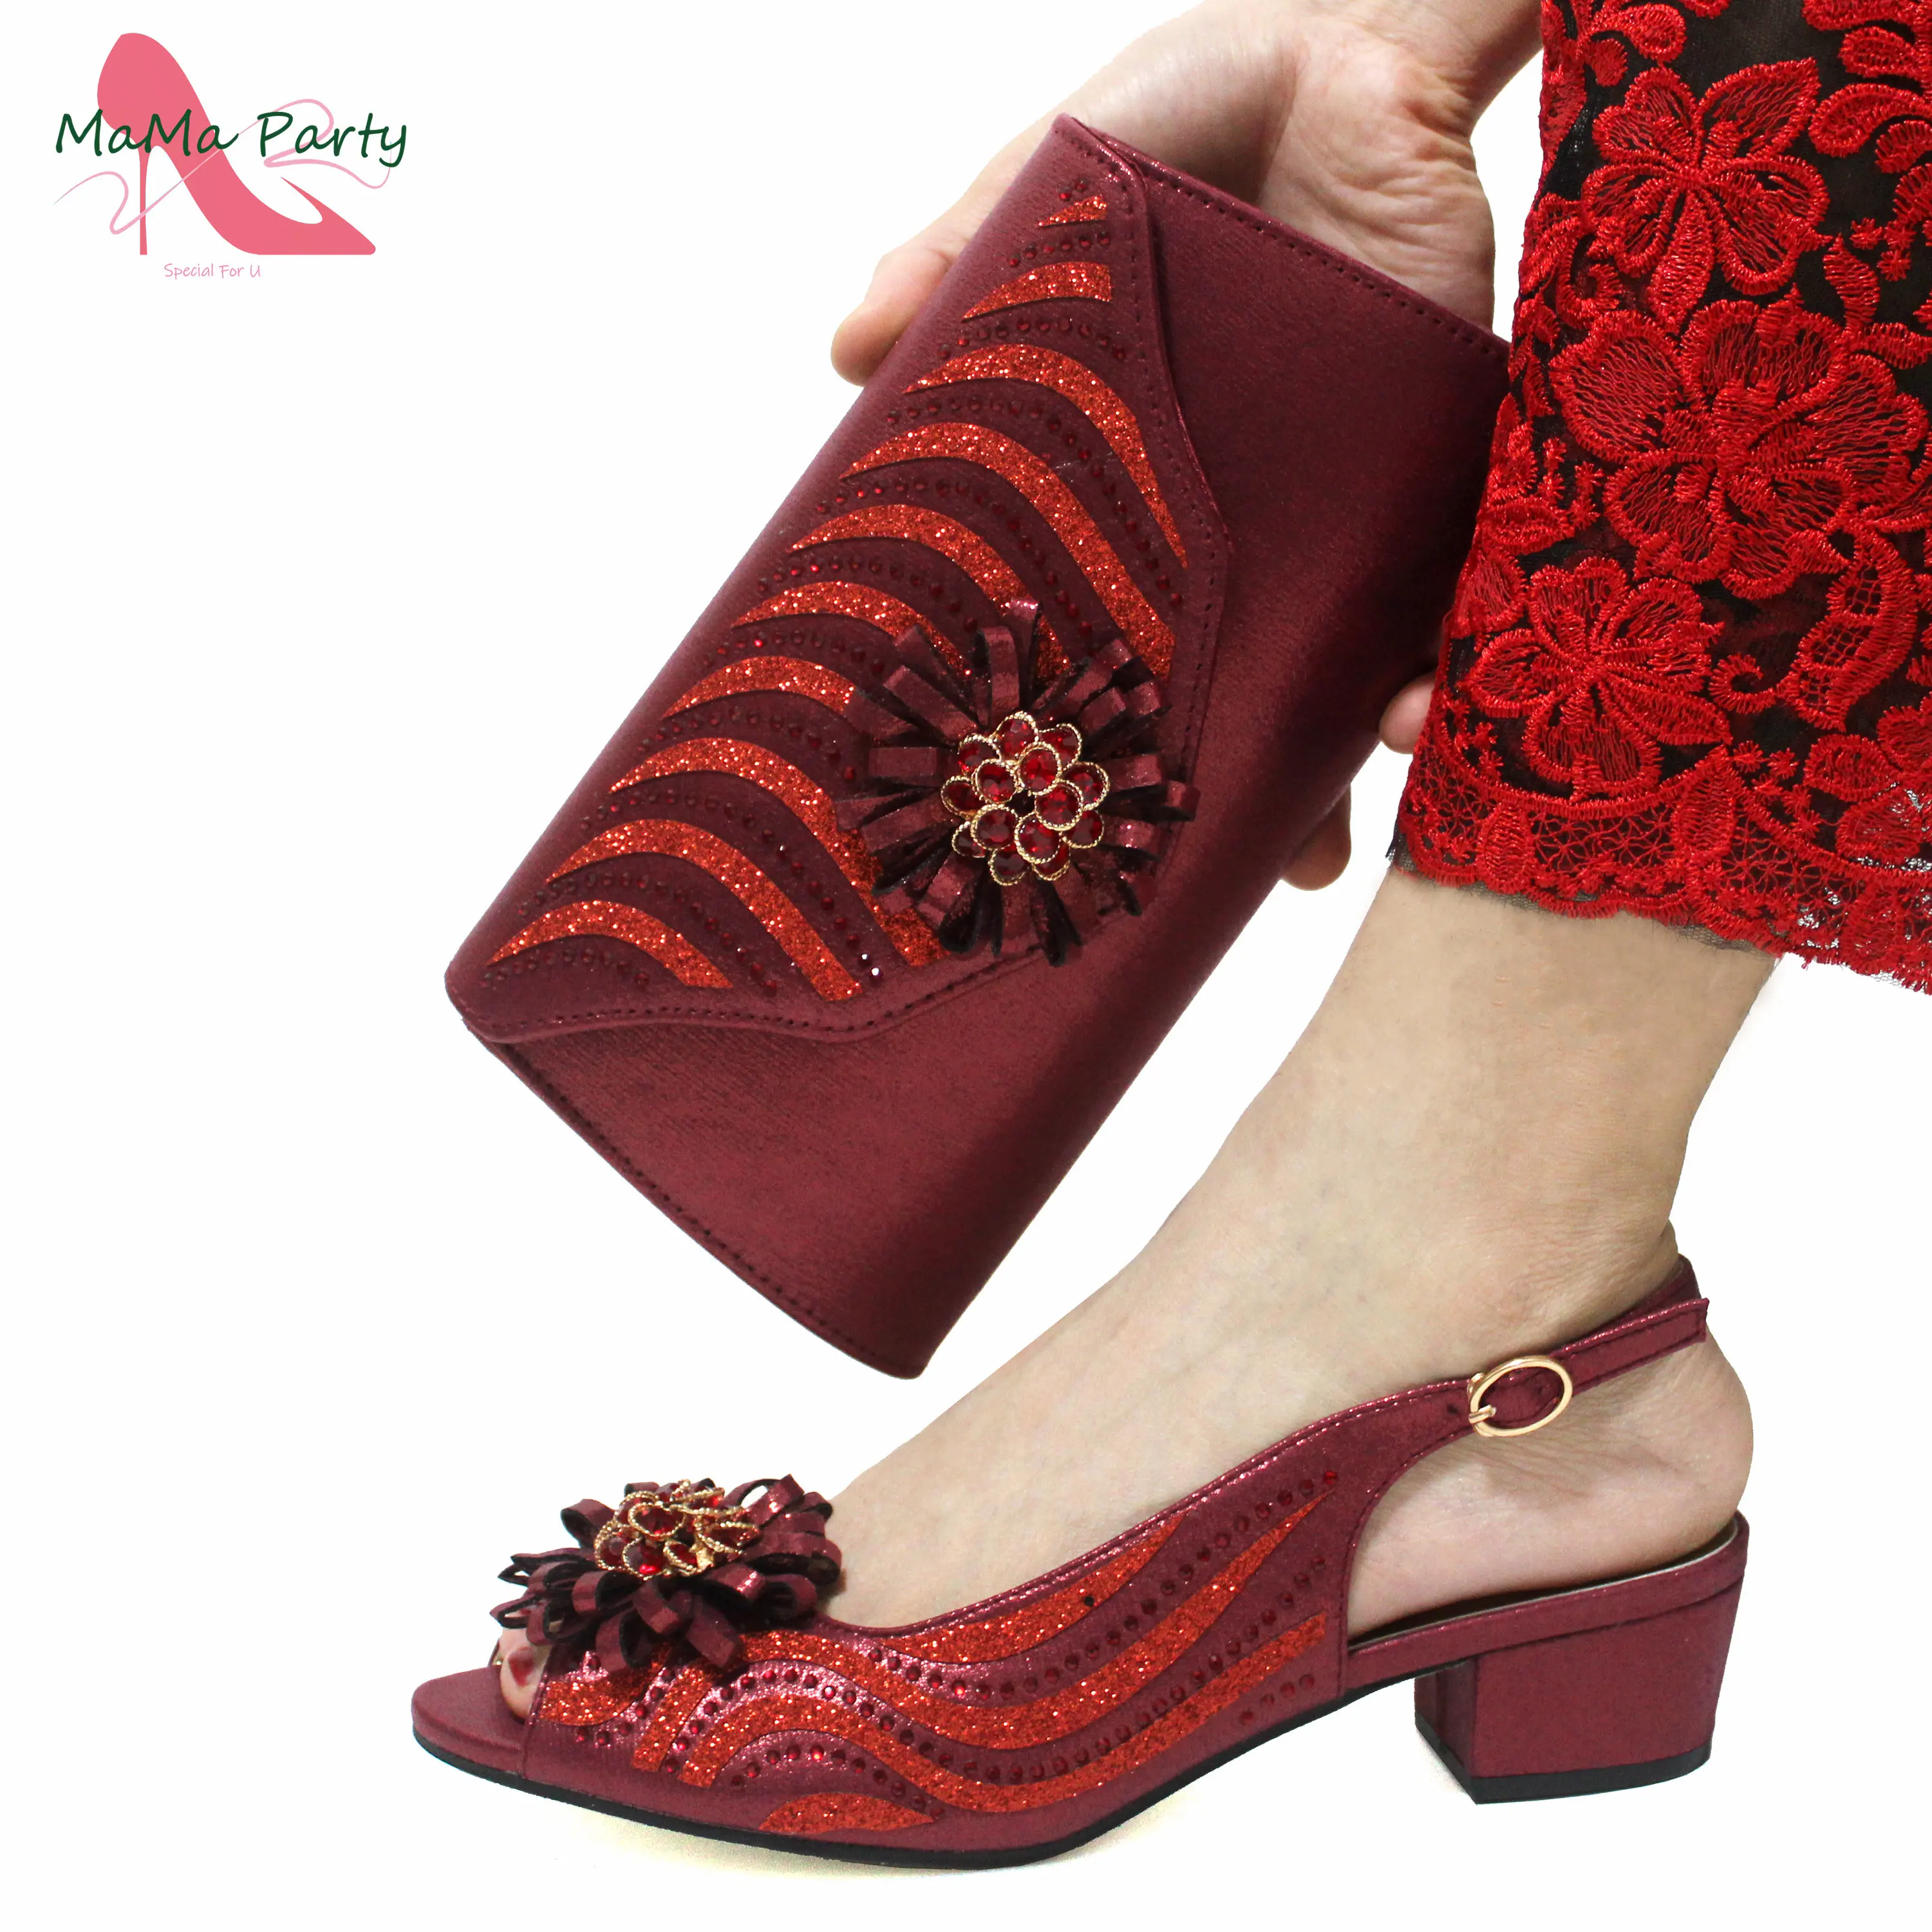 

Low Heels New Arrivals Italian Design Nigerian Women Shoes and Bag Set in Wine Color Comfortable Heels with Appliques for Party